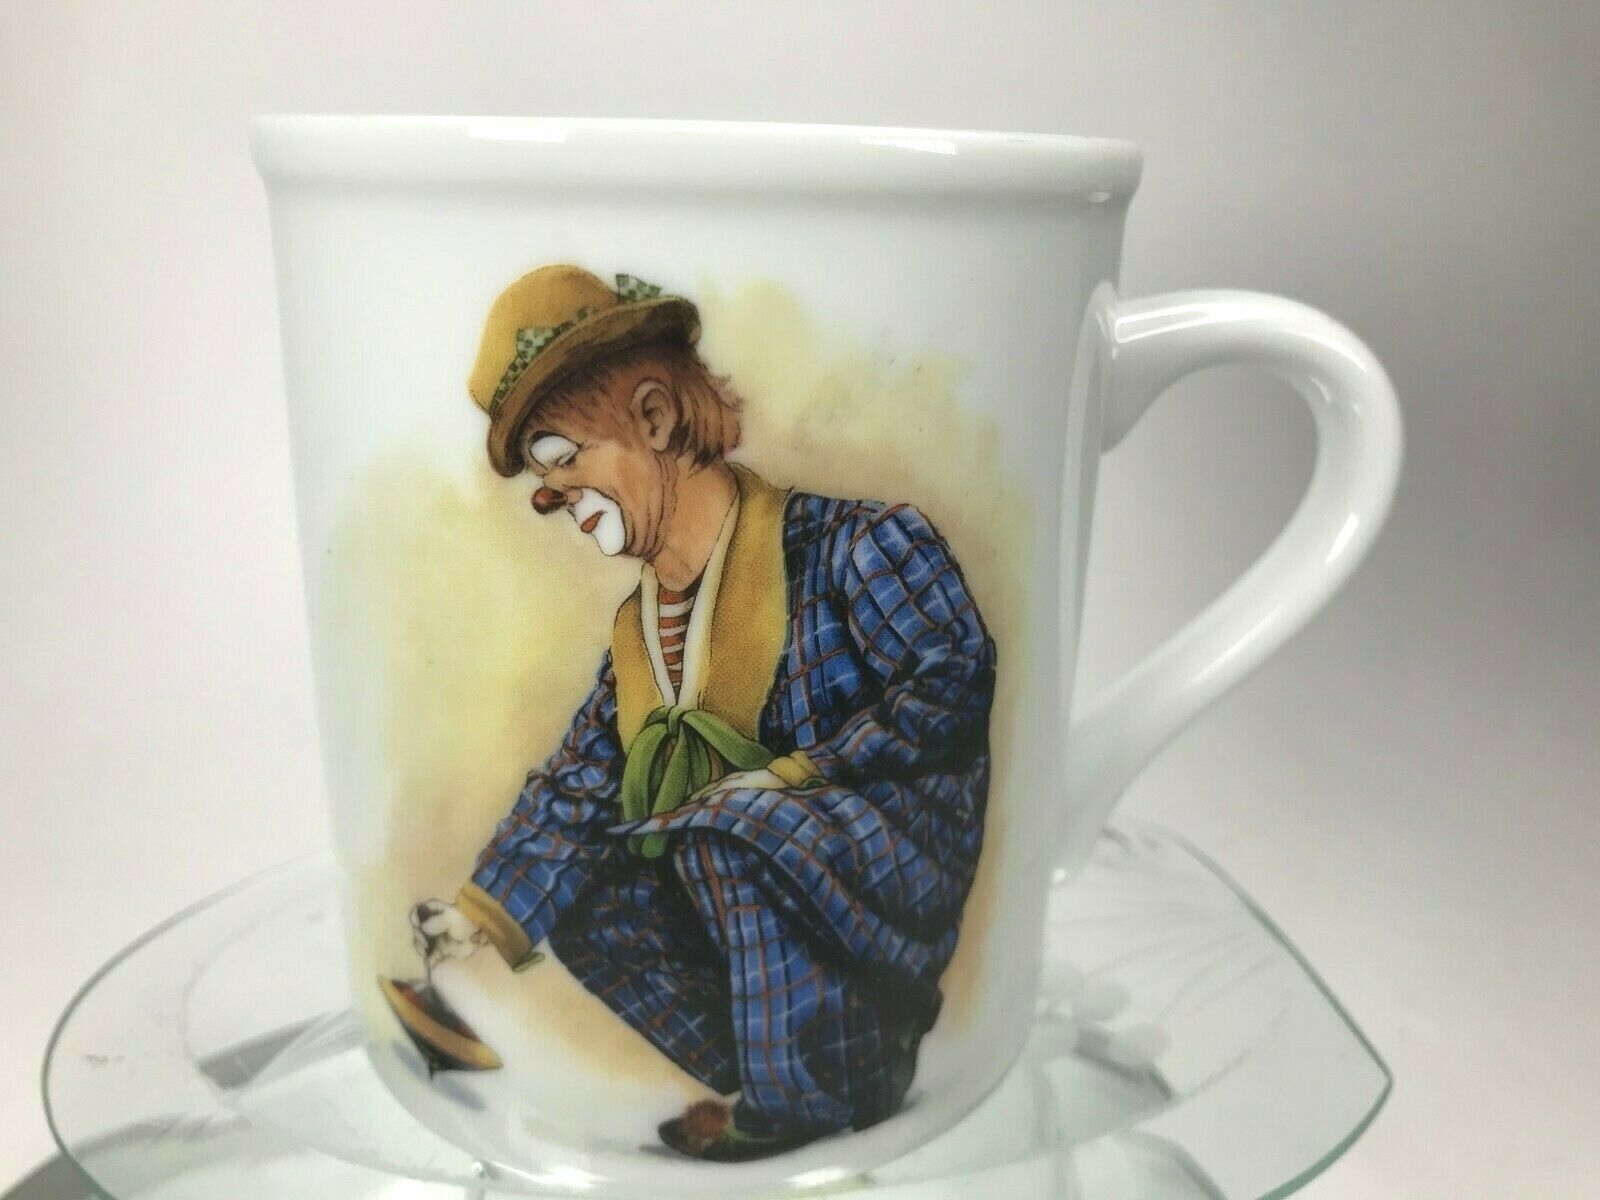 Vintage Clown Mug Lonely Clown Plays Game By Giftware Simson Japan Rare Cup C12